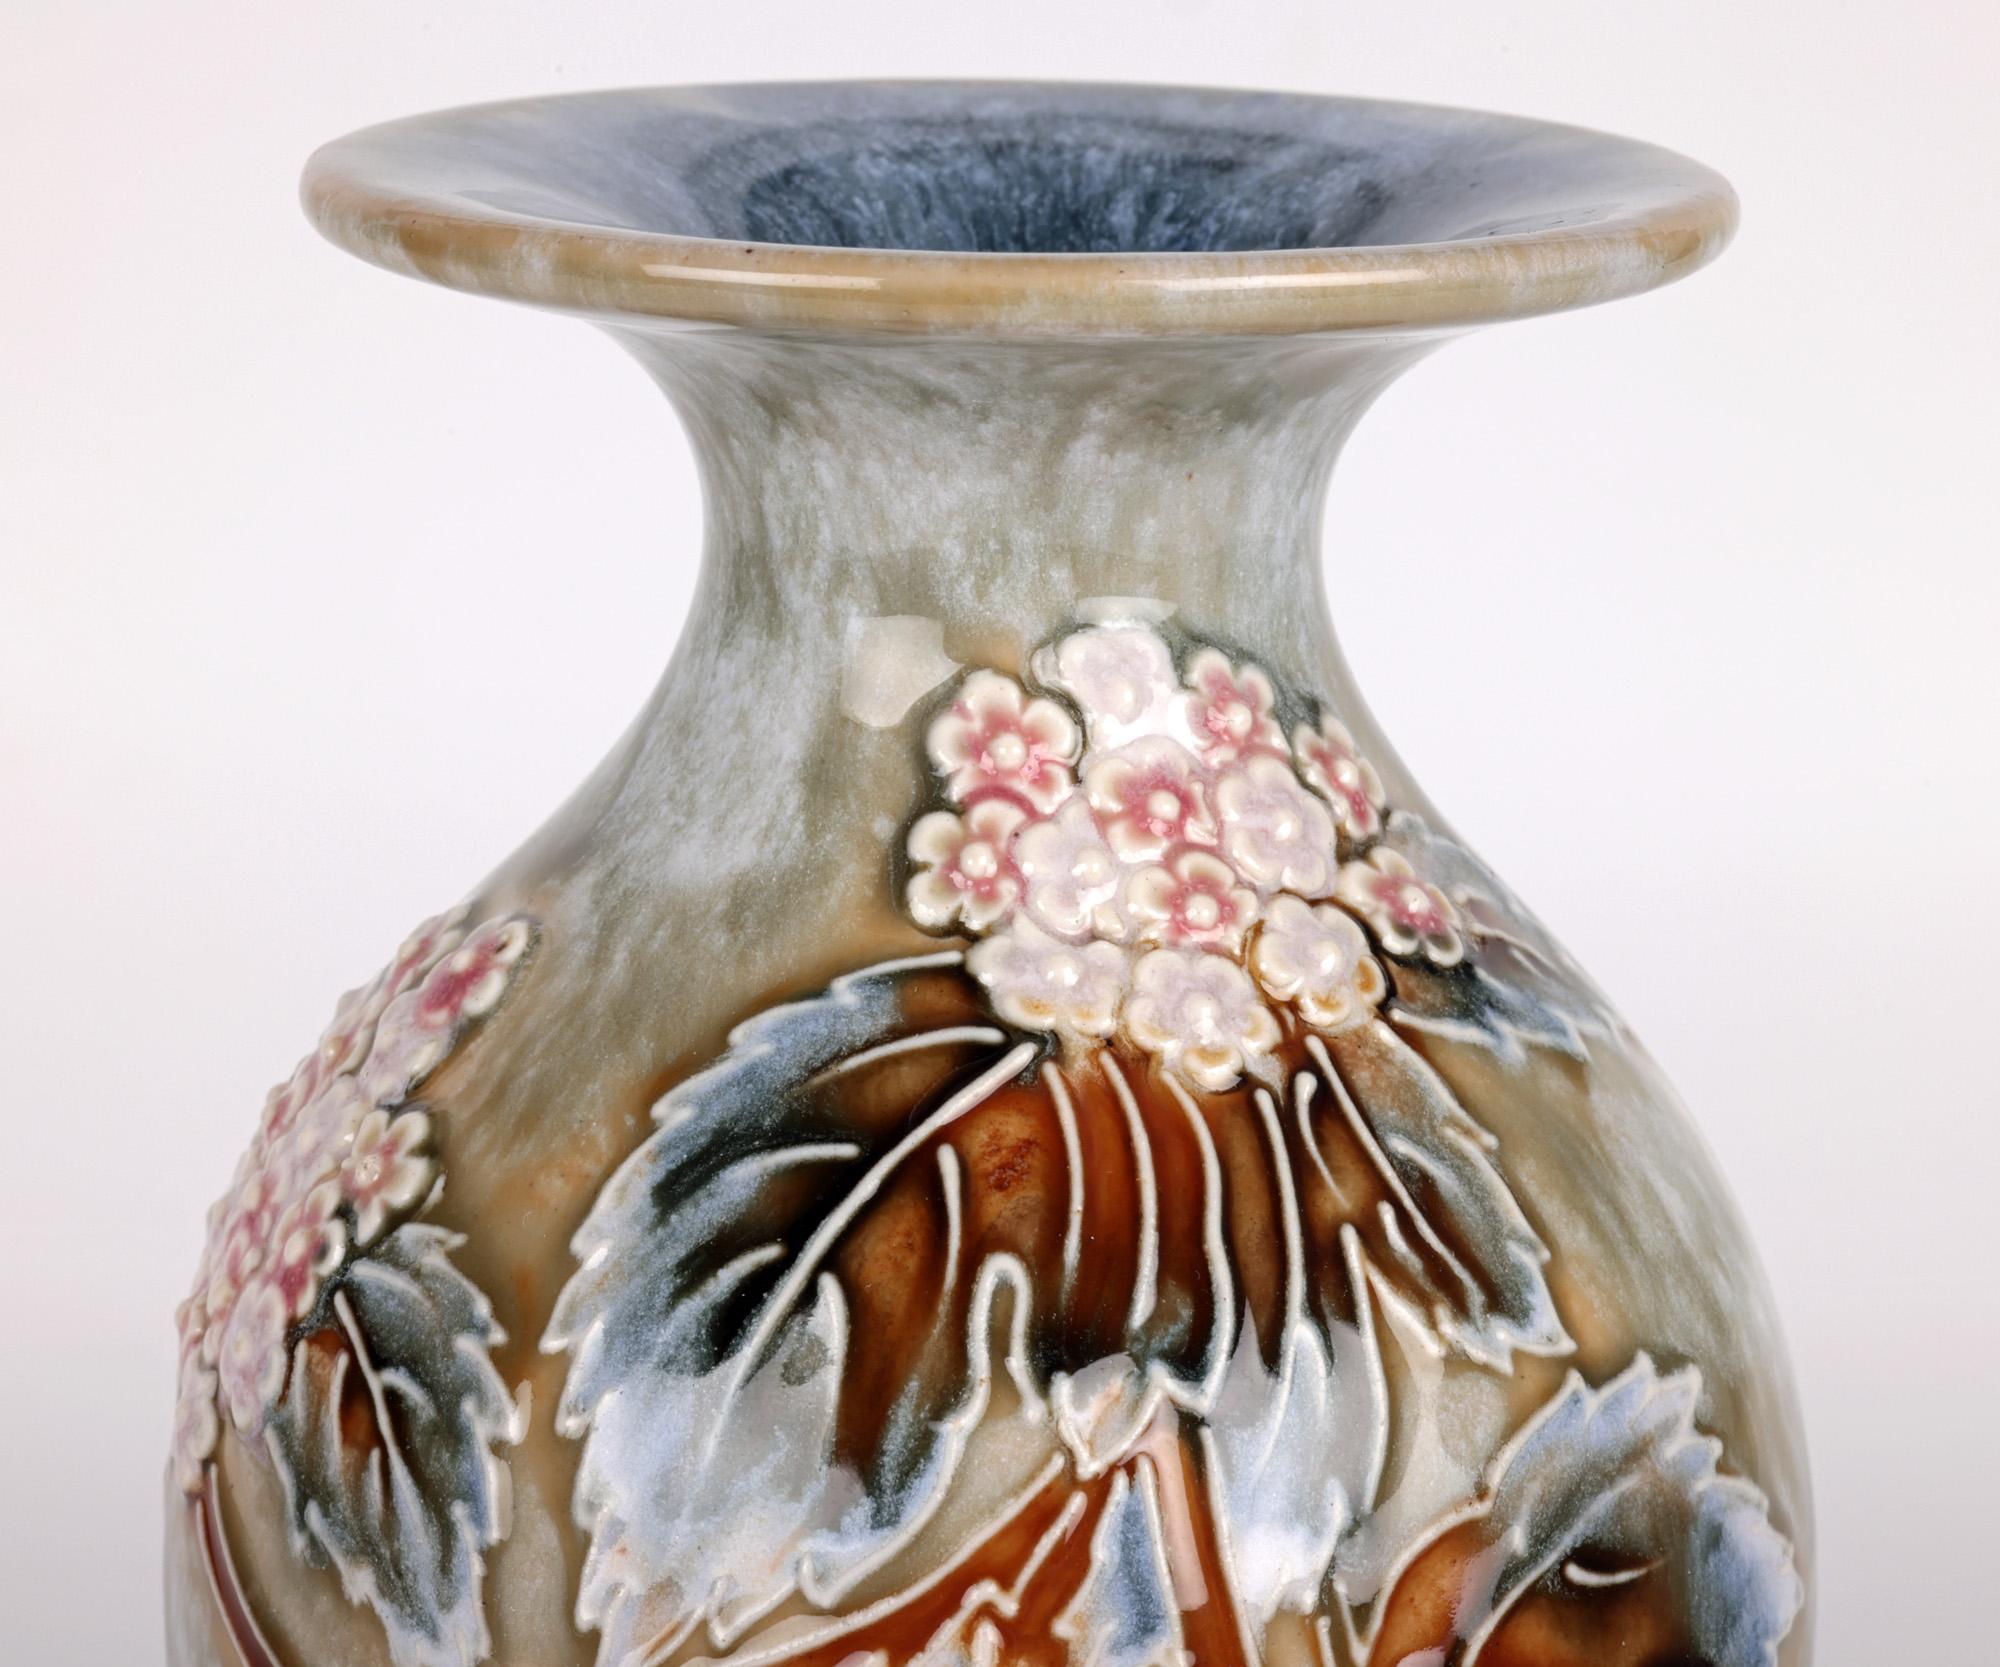 A stunning Doulton Lambeth Art Nouveau stoneware vase decorated with floral designs by renowned artist Florence C Roberts and dating from around 1905. The tall elegantly shaped vase stands raised on a narrow round skirted foot with a tall bulbous